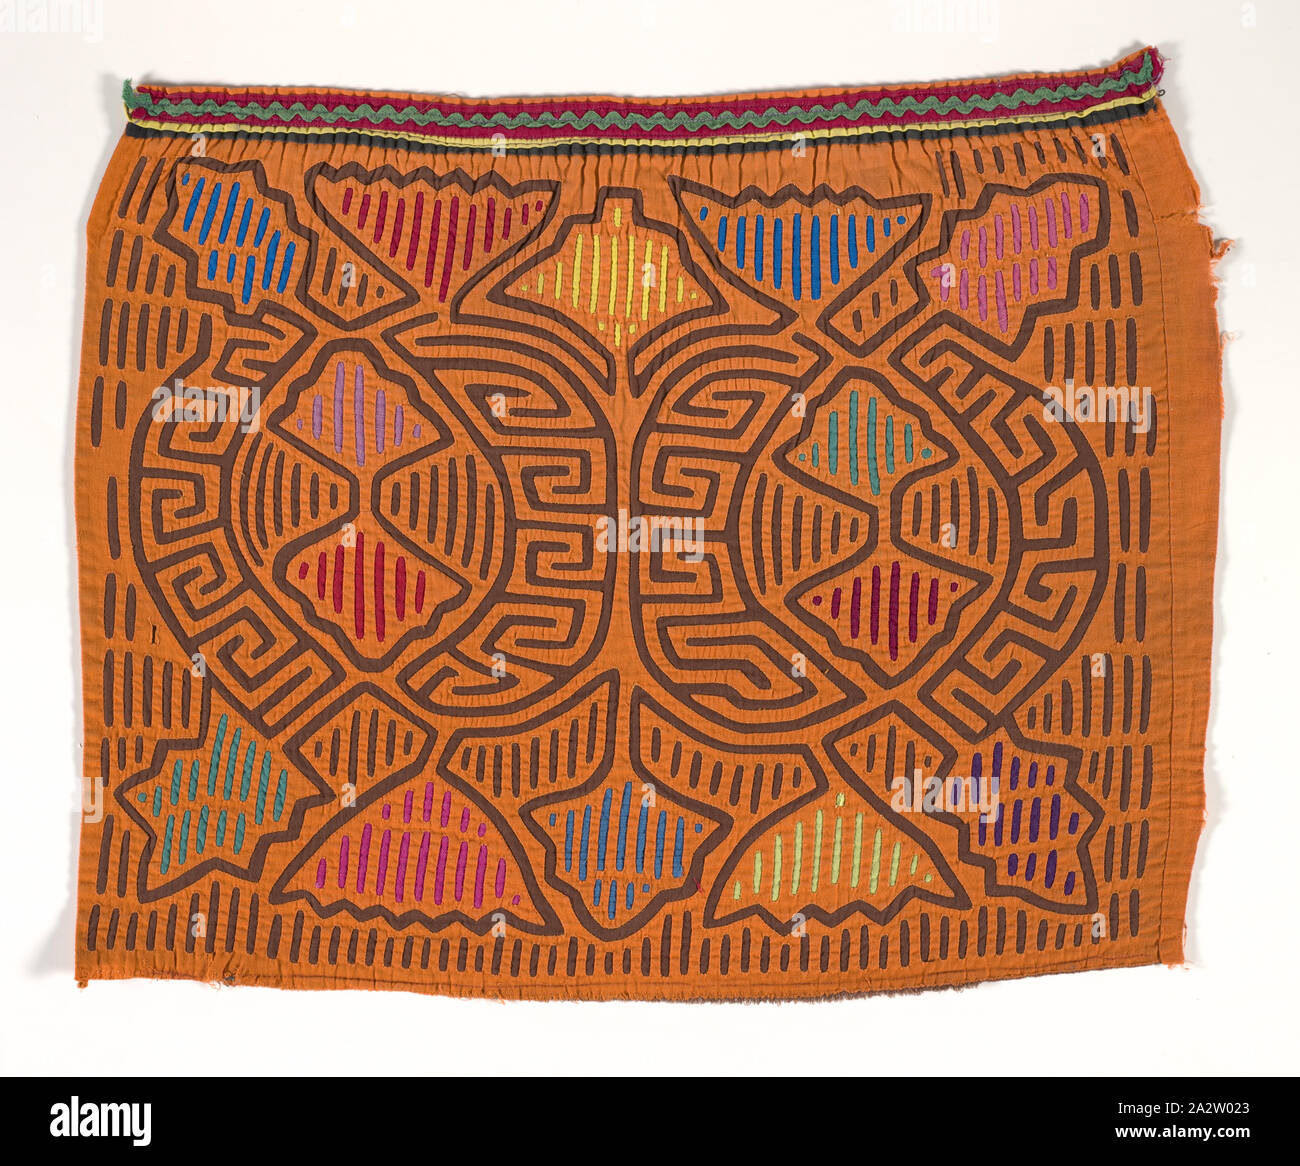 shirt panel (mola), Kuna people, about 1950s, appliqued cotton, 15-3/4 x 19-5/8 in., Textile and Fashion Arts Stock Photo